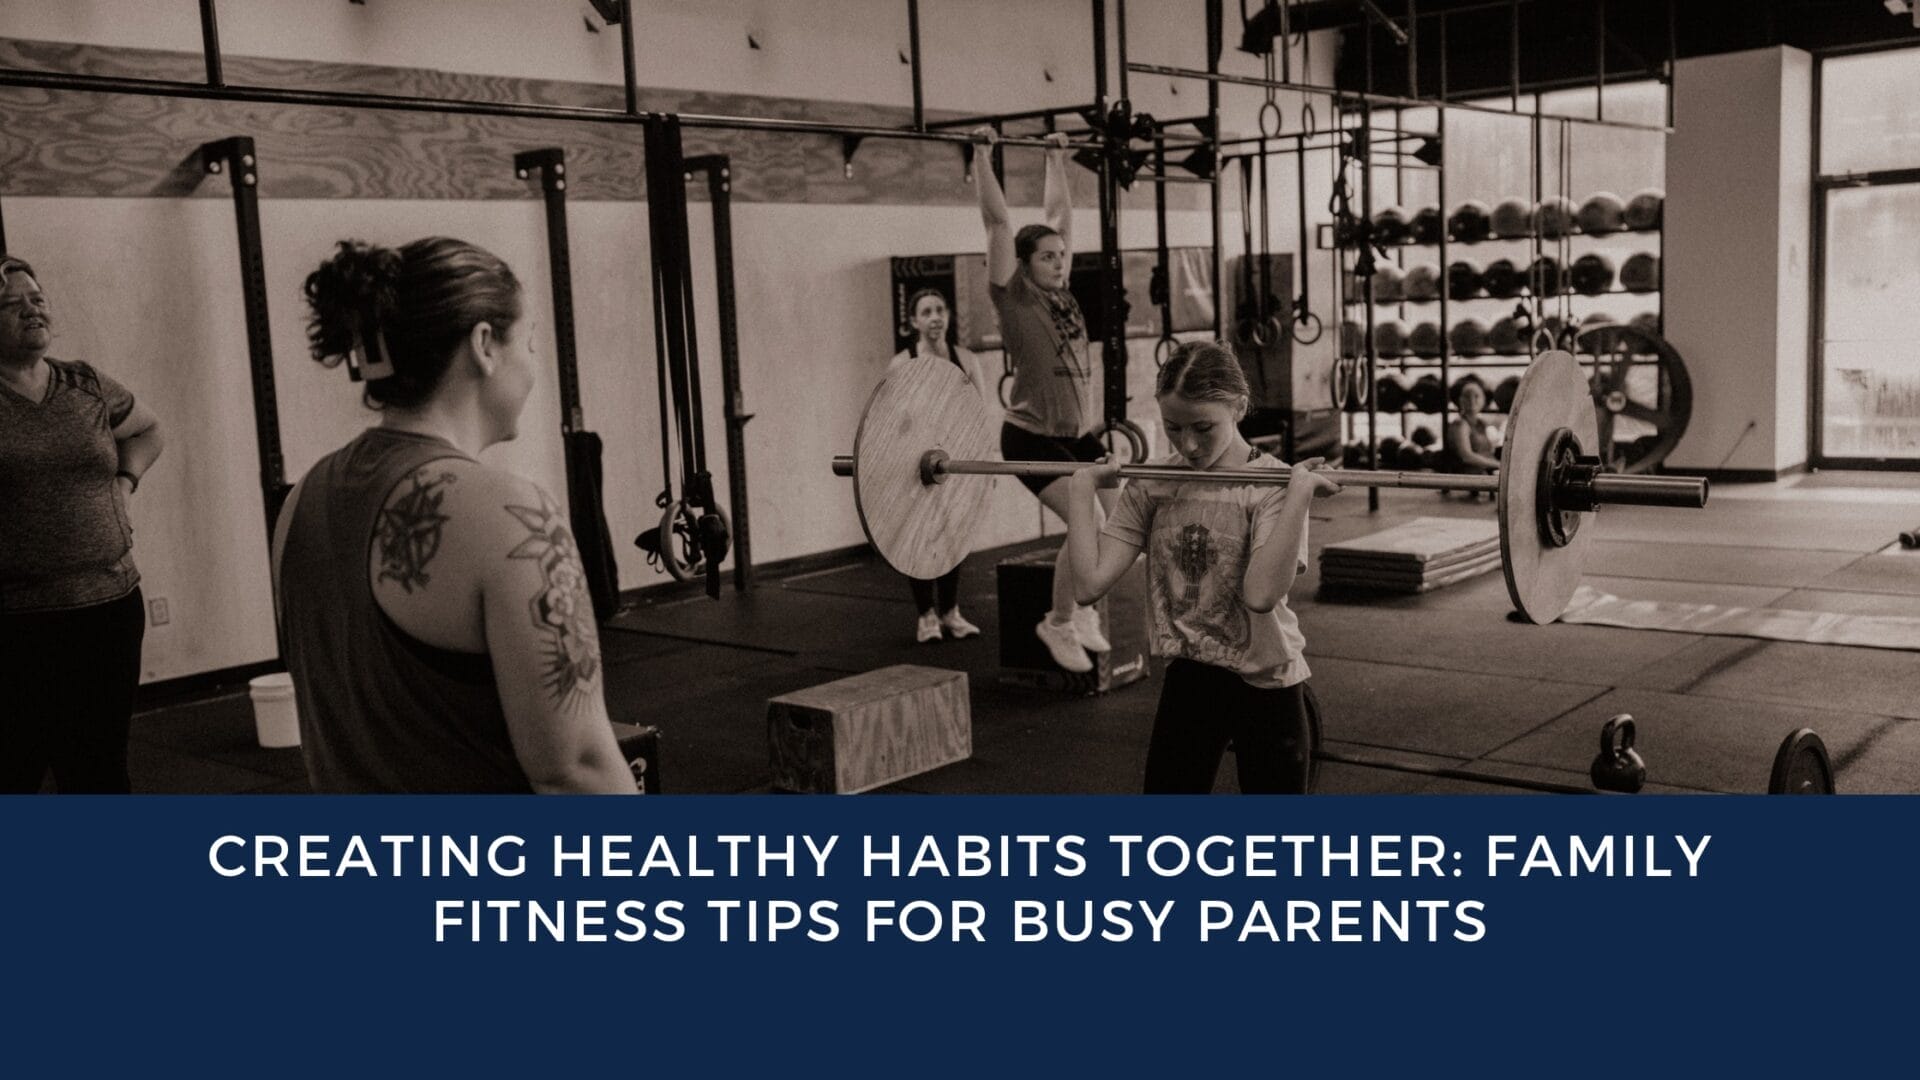 Creating Healthy Habits Together: Family Fitness Tips for Busy Parents